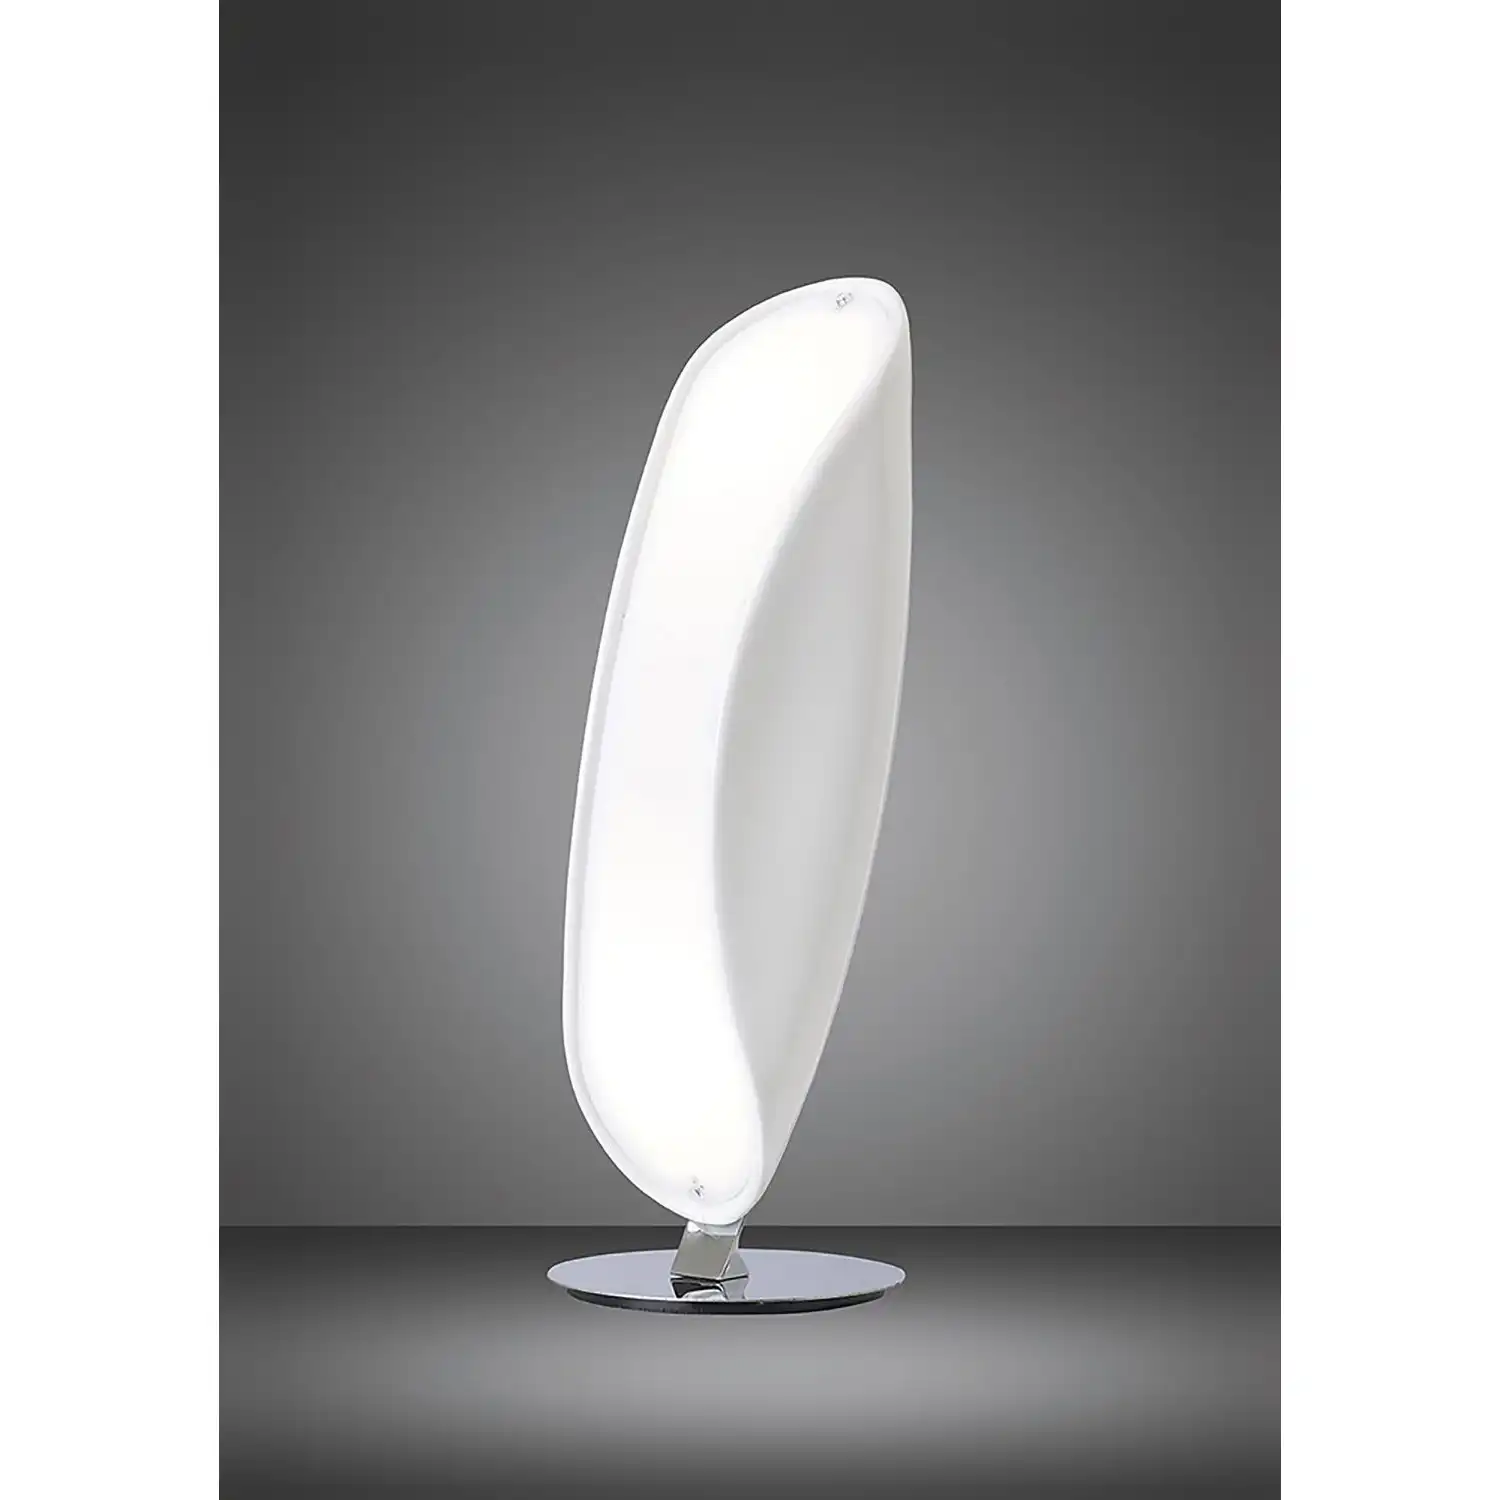 Pasion Table Lamp 2 Light E27, Gloss White White Acrylic Polished Chrome, CFL Lamps INCLUDED